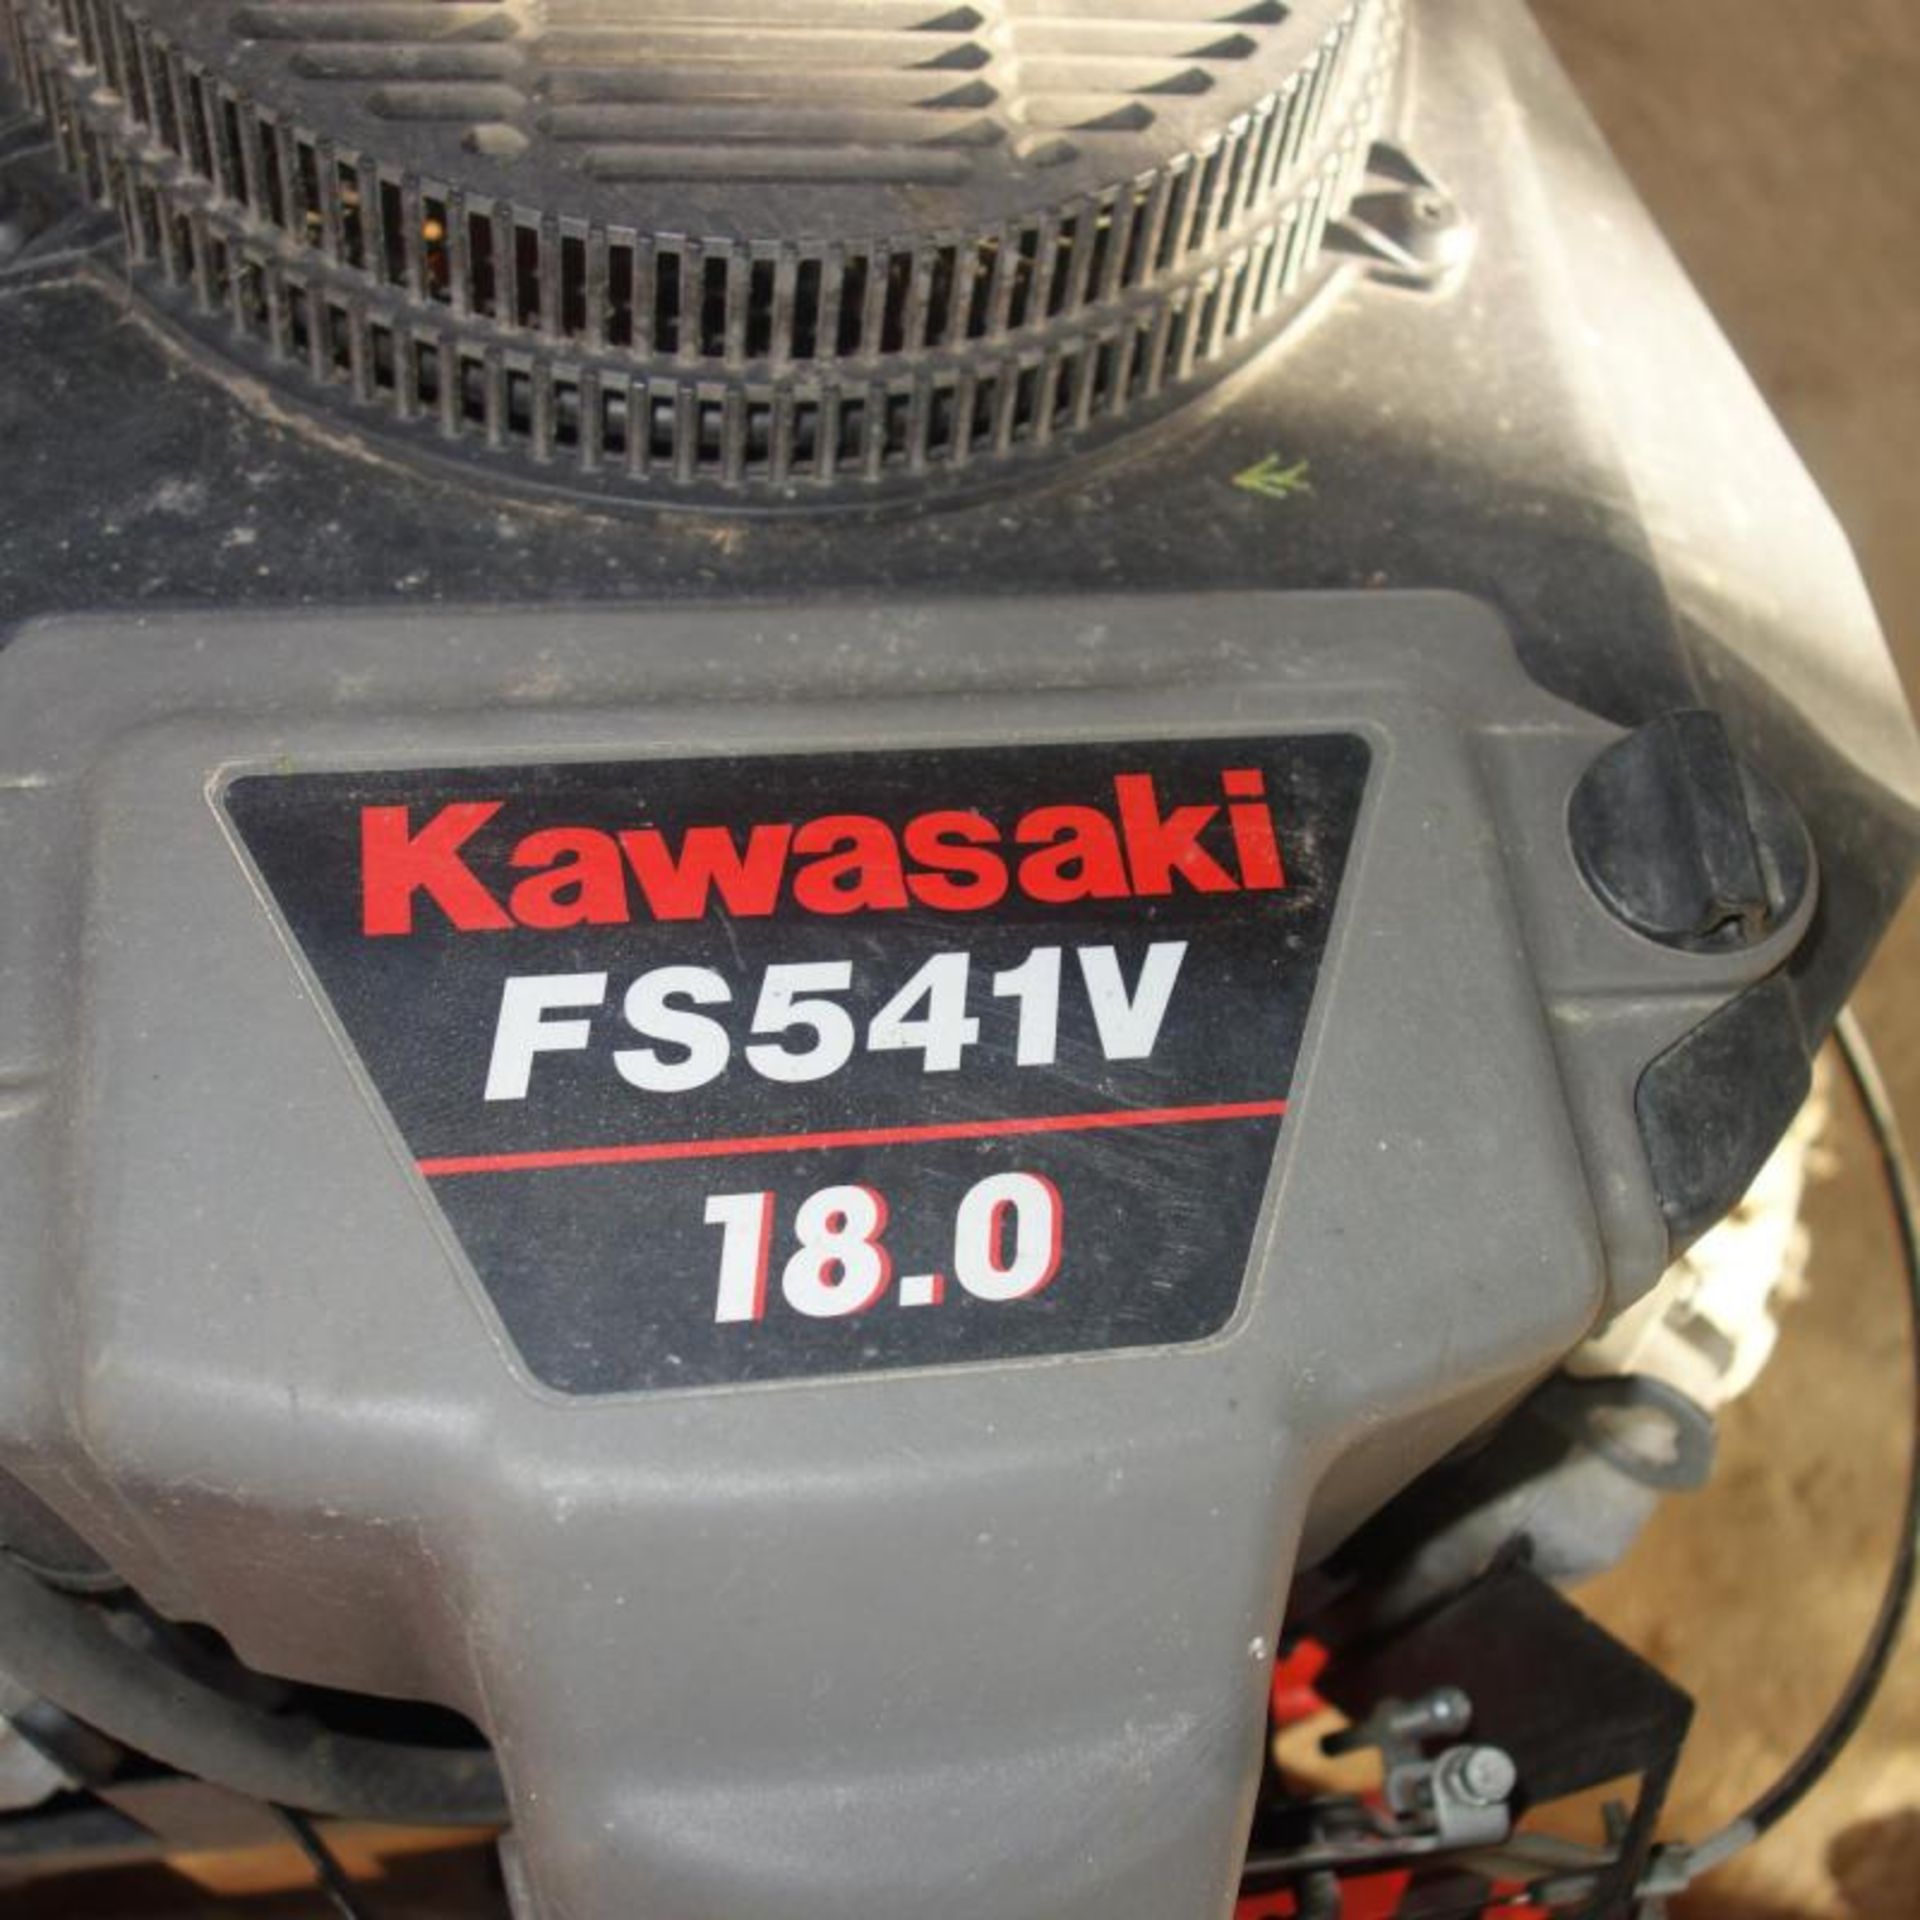 Dr Field And Brusk Mower Fitted With Kawasaki Engine - Image 7 of 9